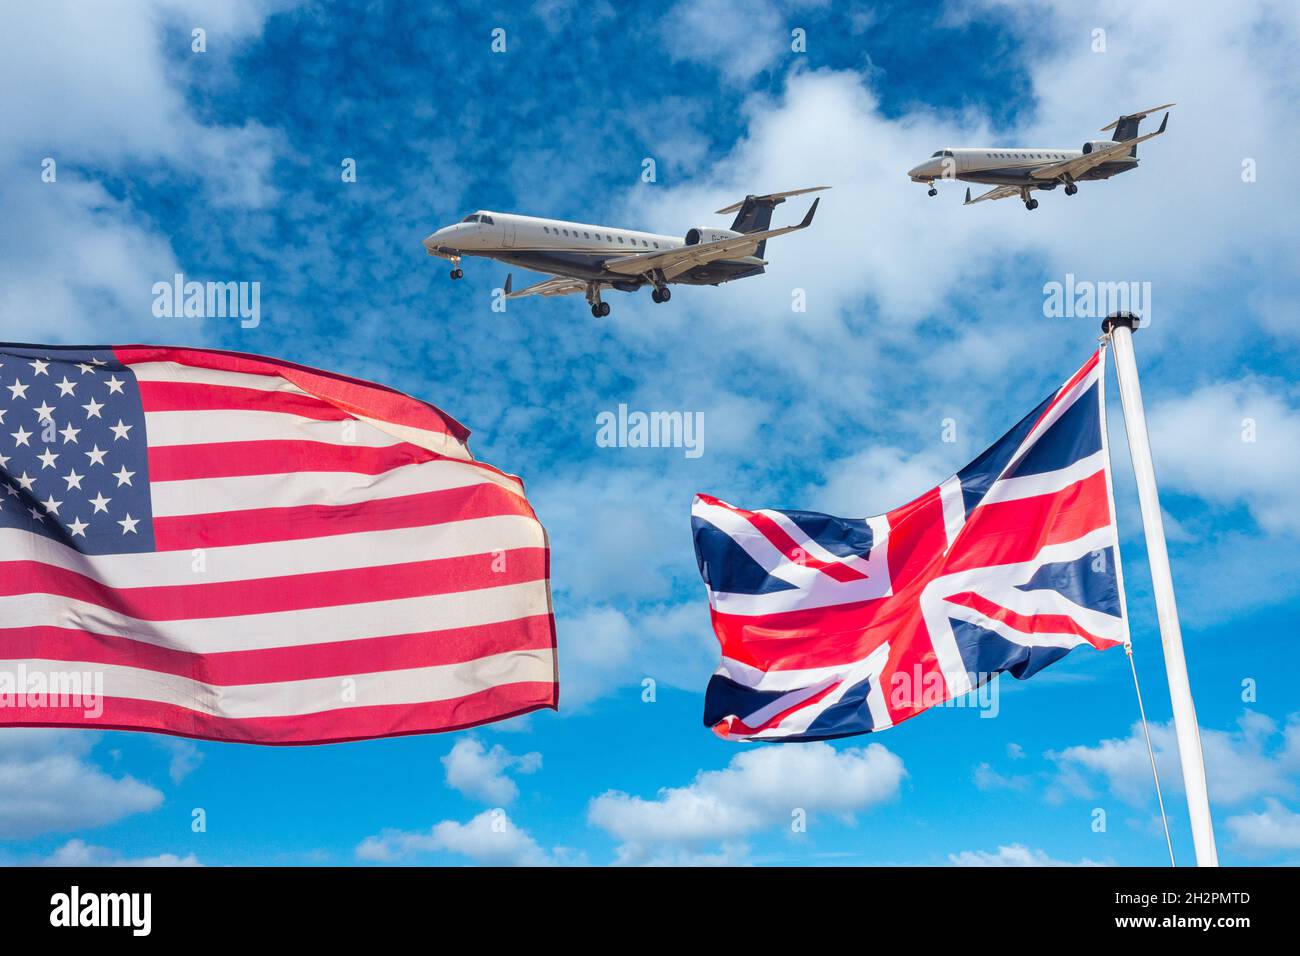 Flags of USA and UK with private jets against blue sky. Aviation industry, global warming, trade deals, air pollution, Covid flight ban... concept. Stock Photo